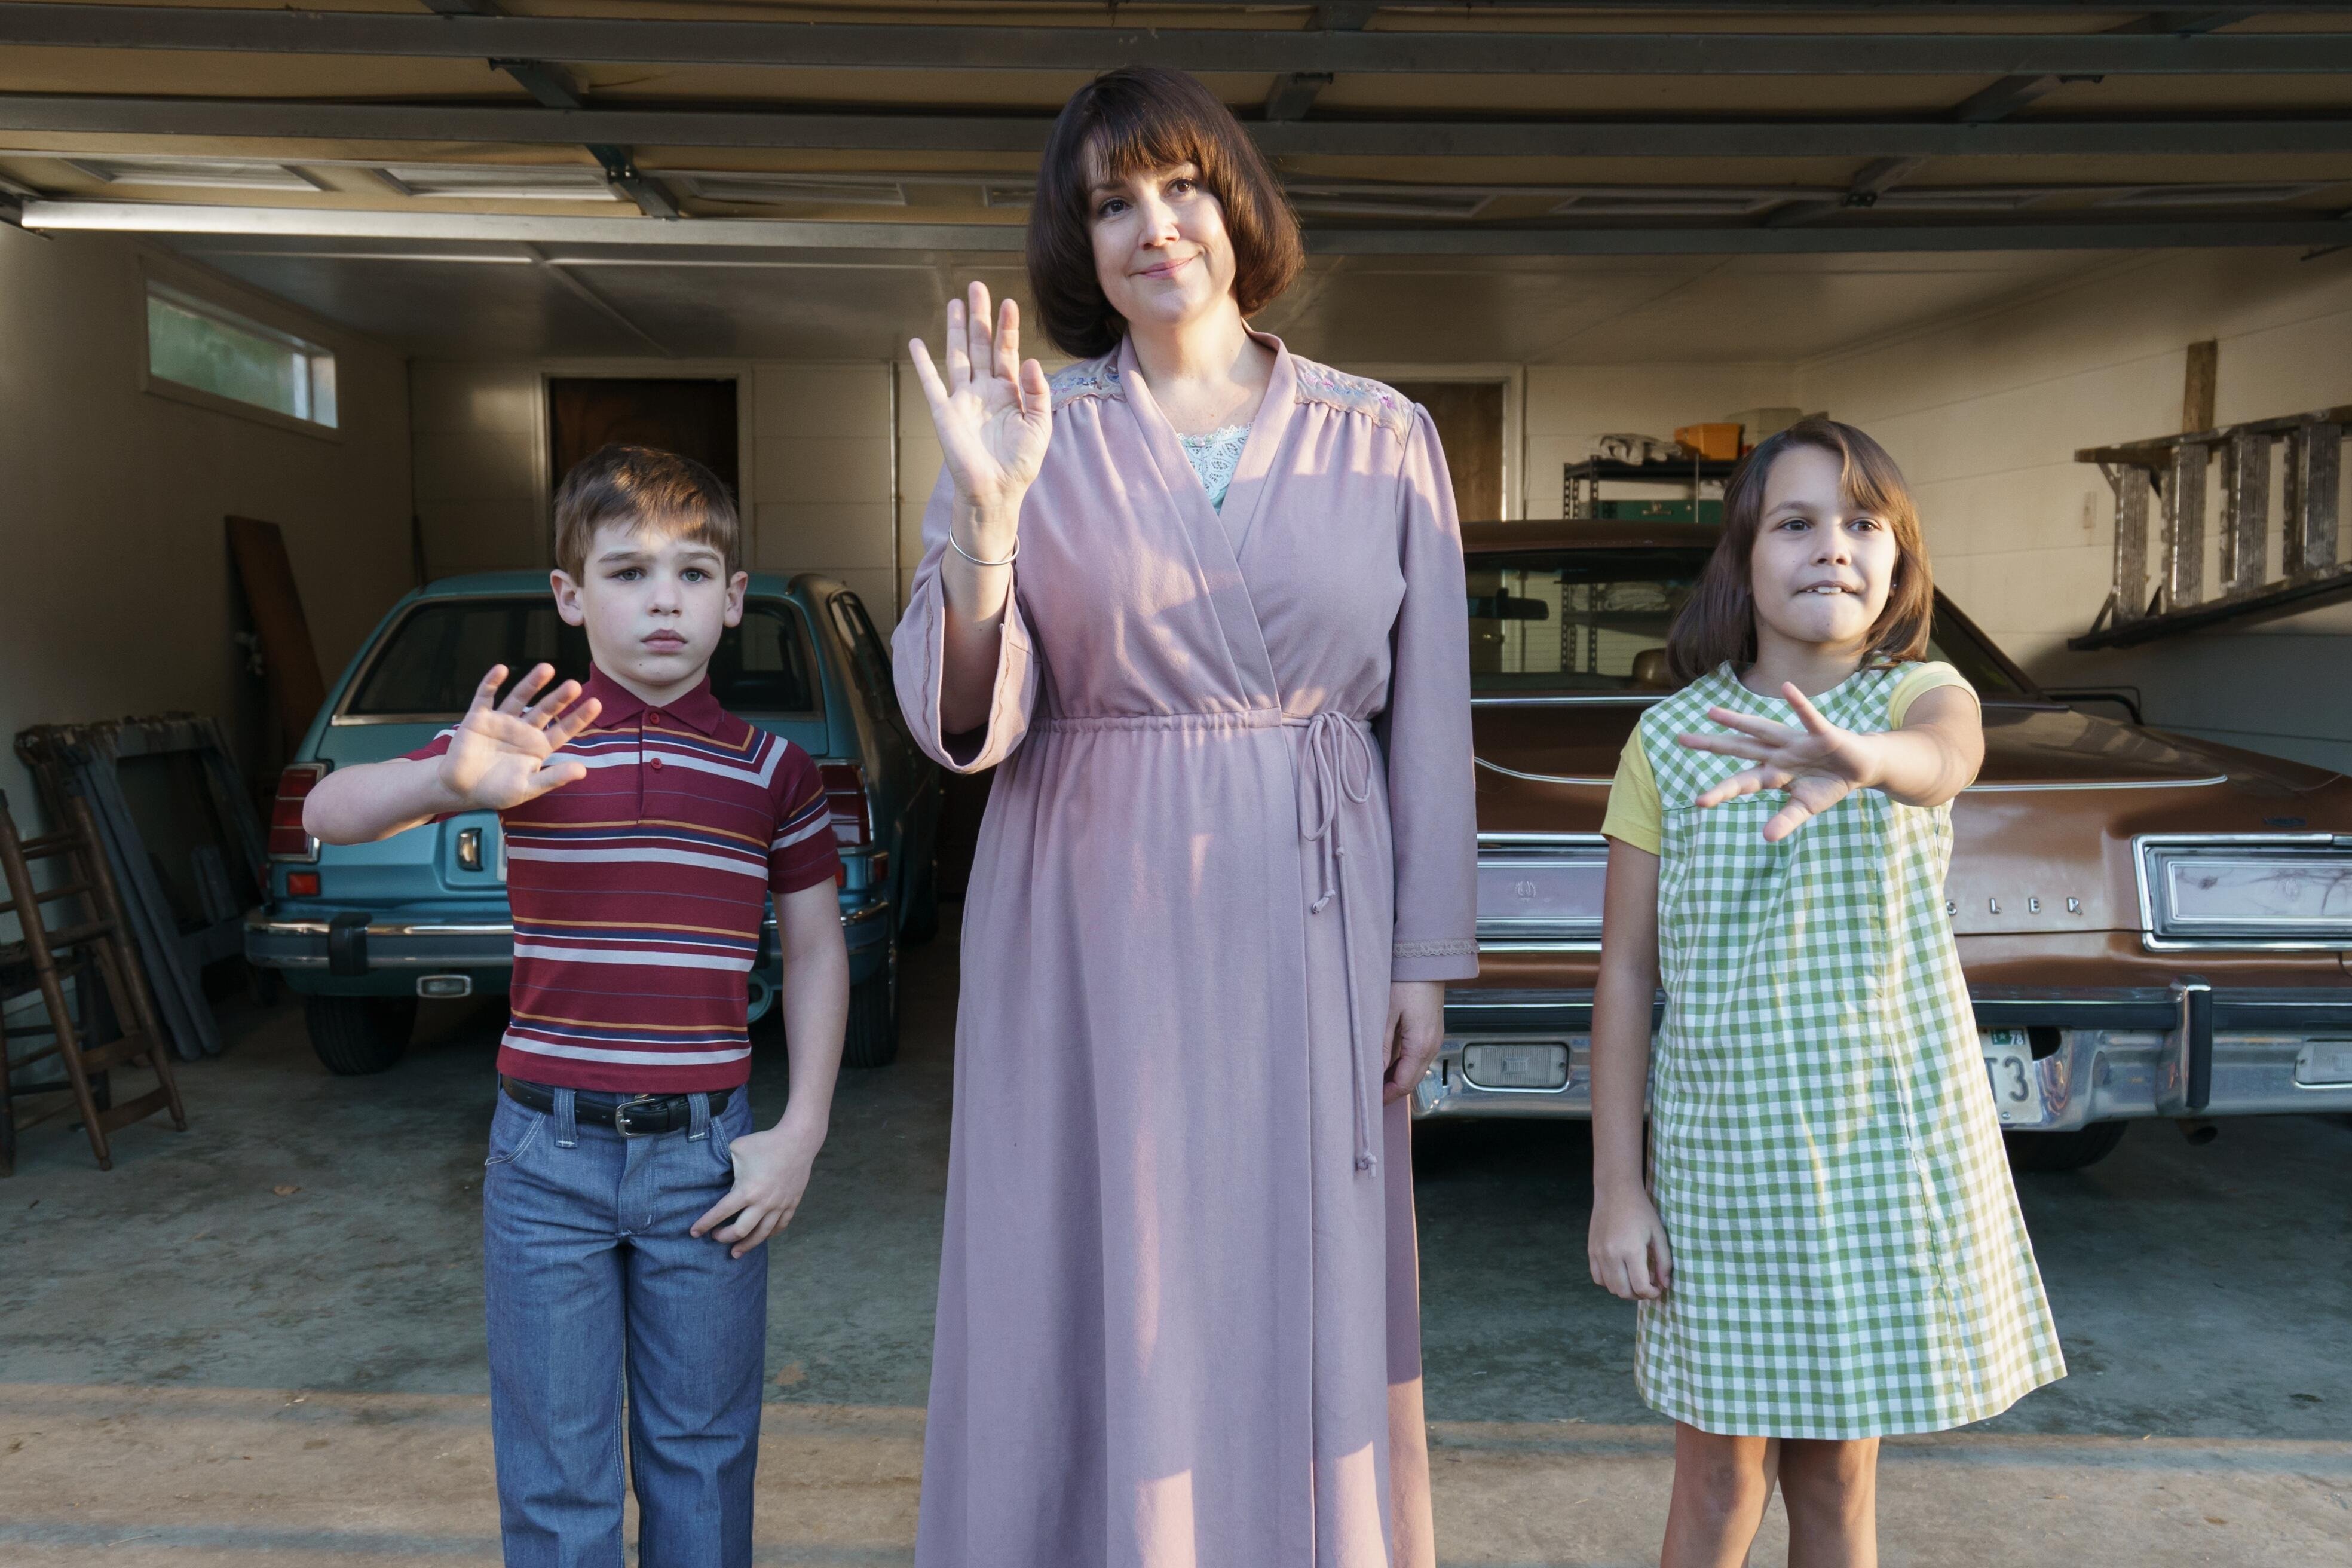 The 'Candy' cast kids stand with on-screen mom; Hudson Hughes as Davey, Melanie Lynskey as Betty Gore, and Antonella Rose as Christina